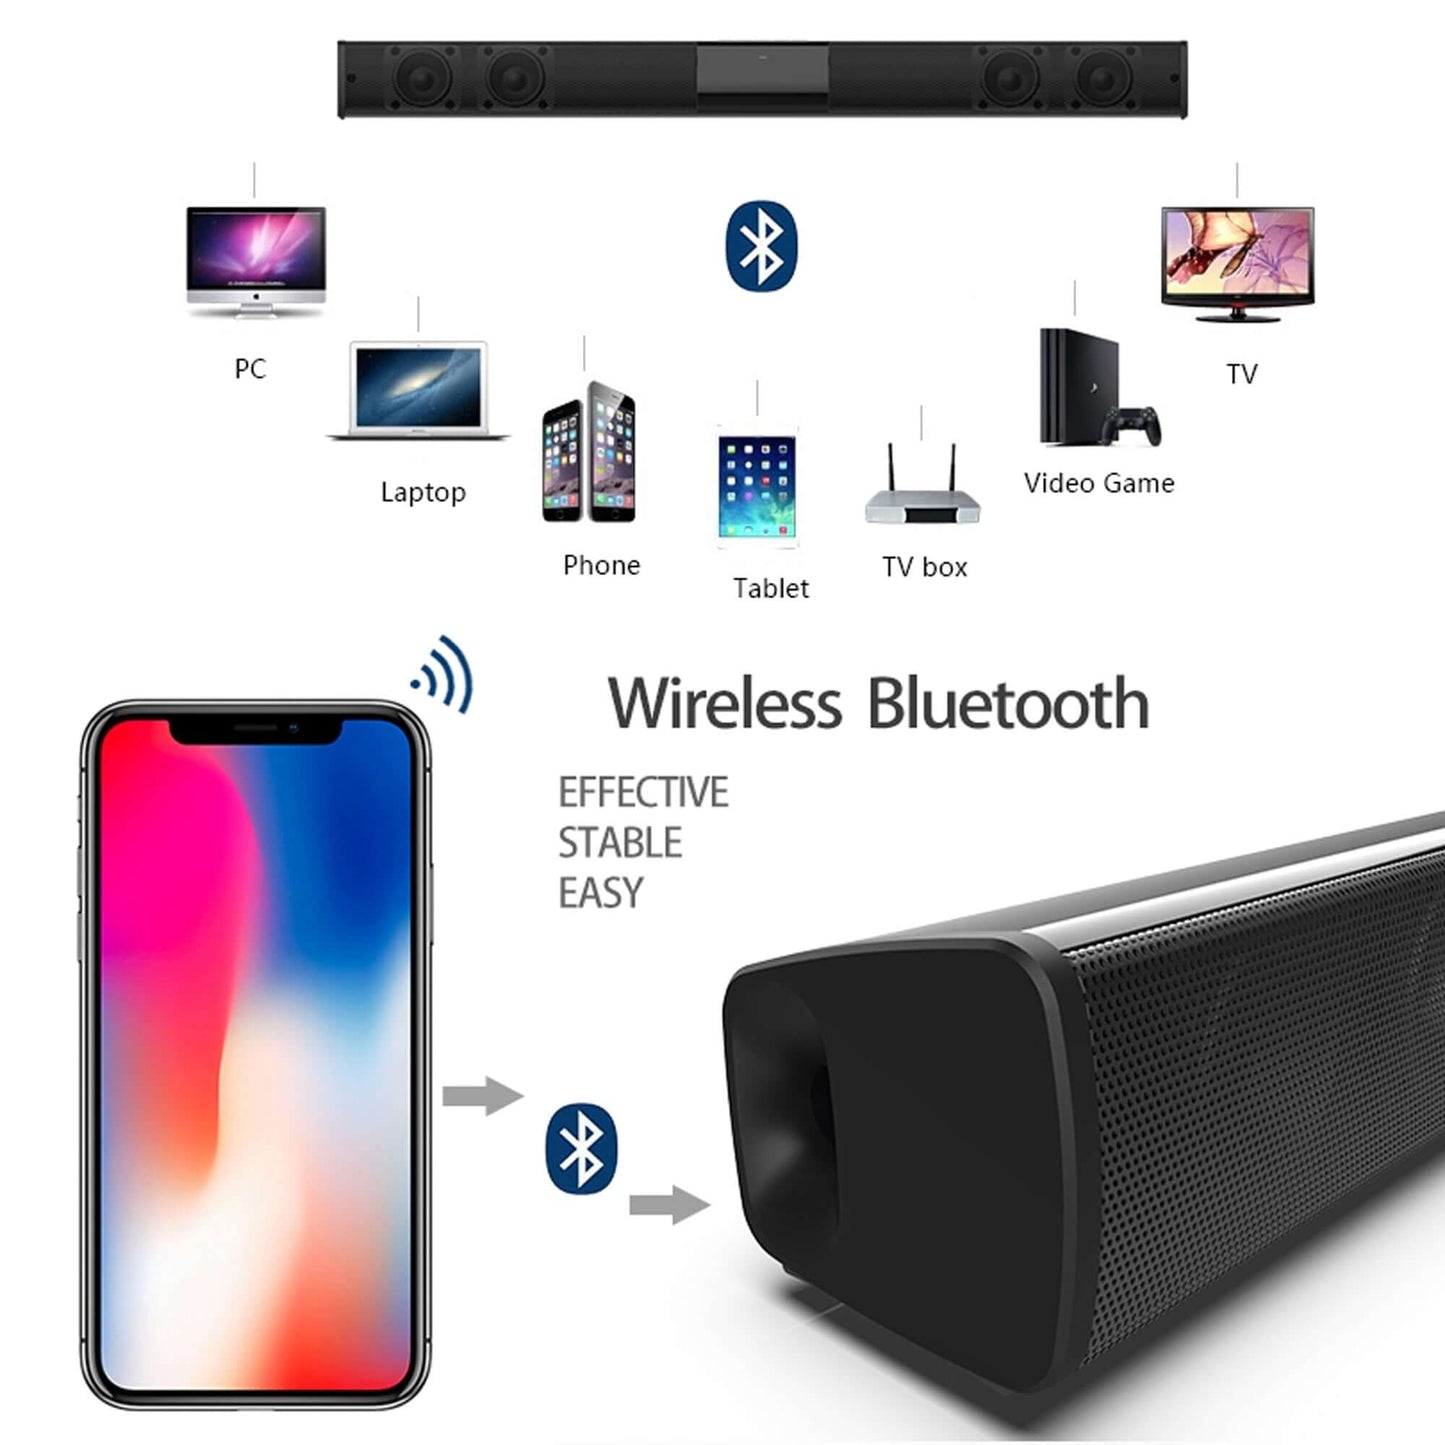 Get a great deal on a Wireless Home Theater Sound Bar